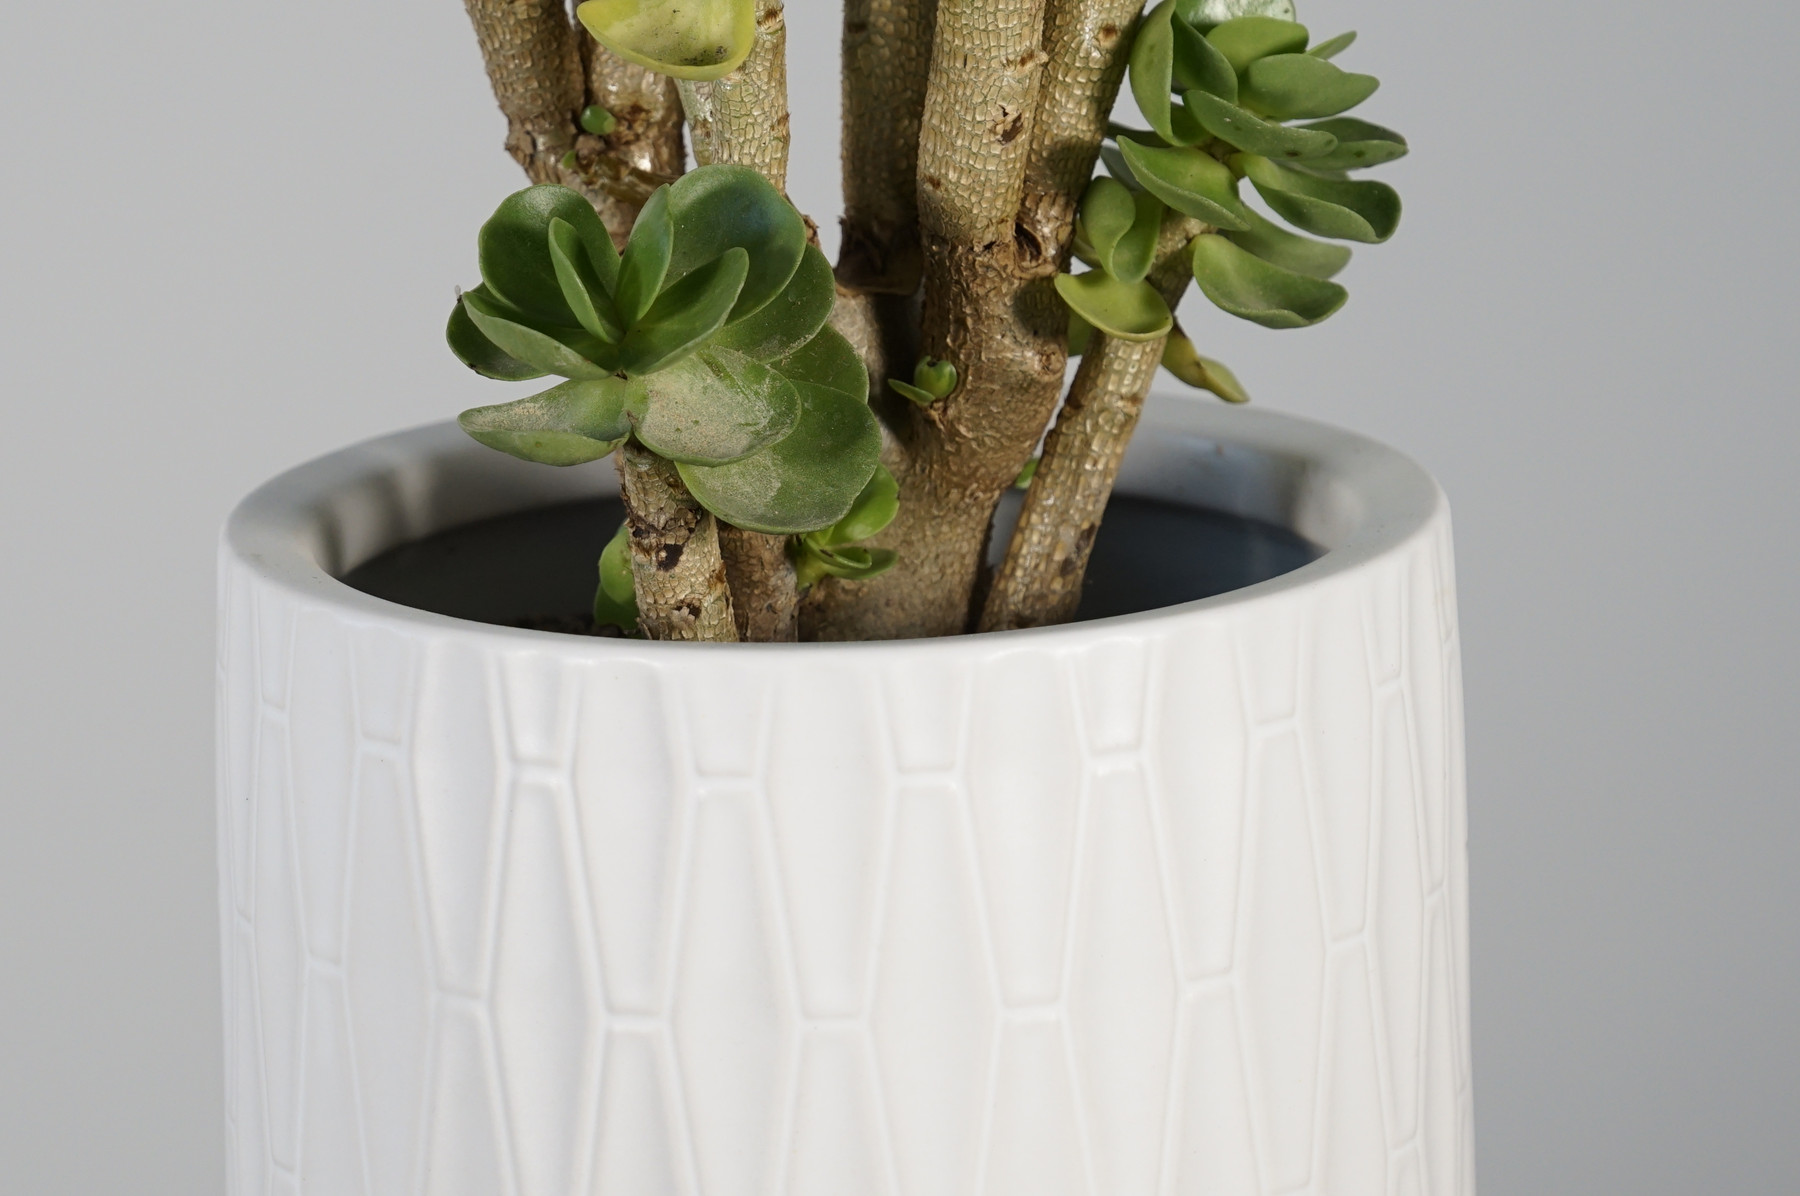 Better Homes & Gardens 6in Kennewick Ceramic Planter With Stand, White - image 3 of 8